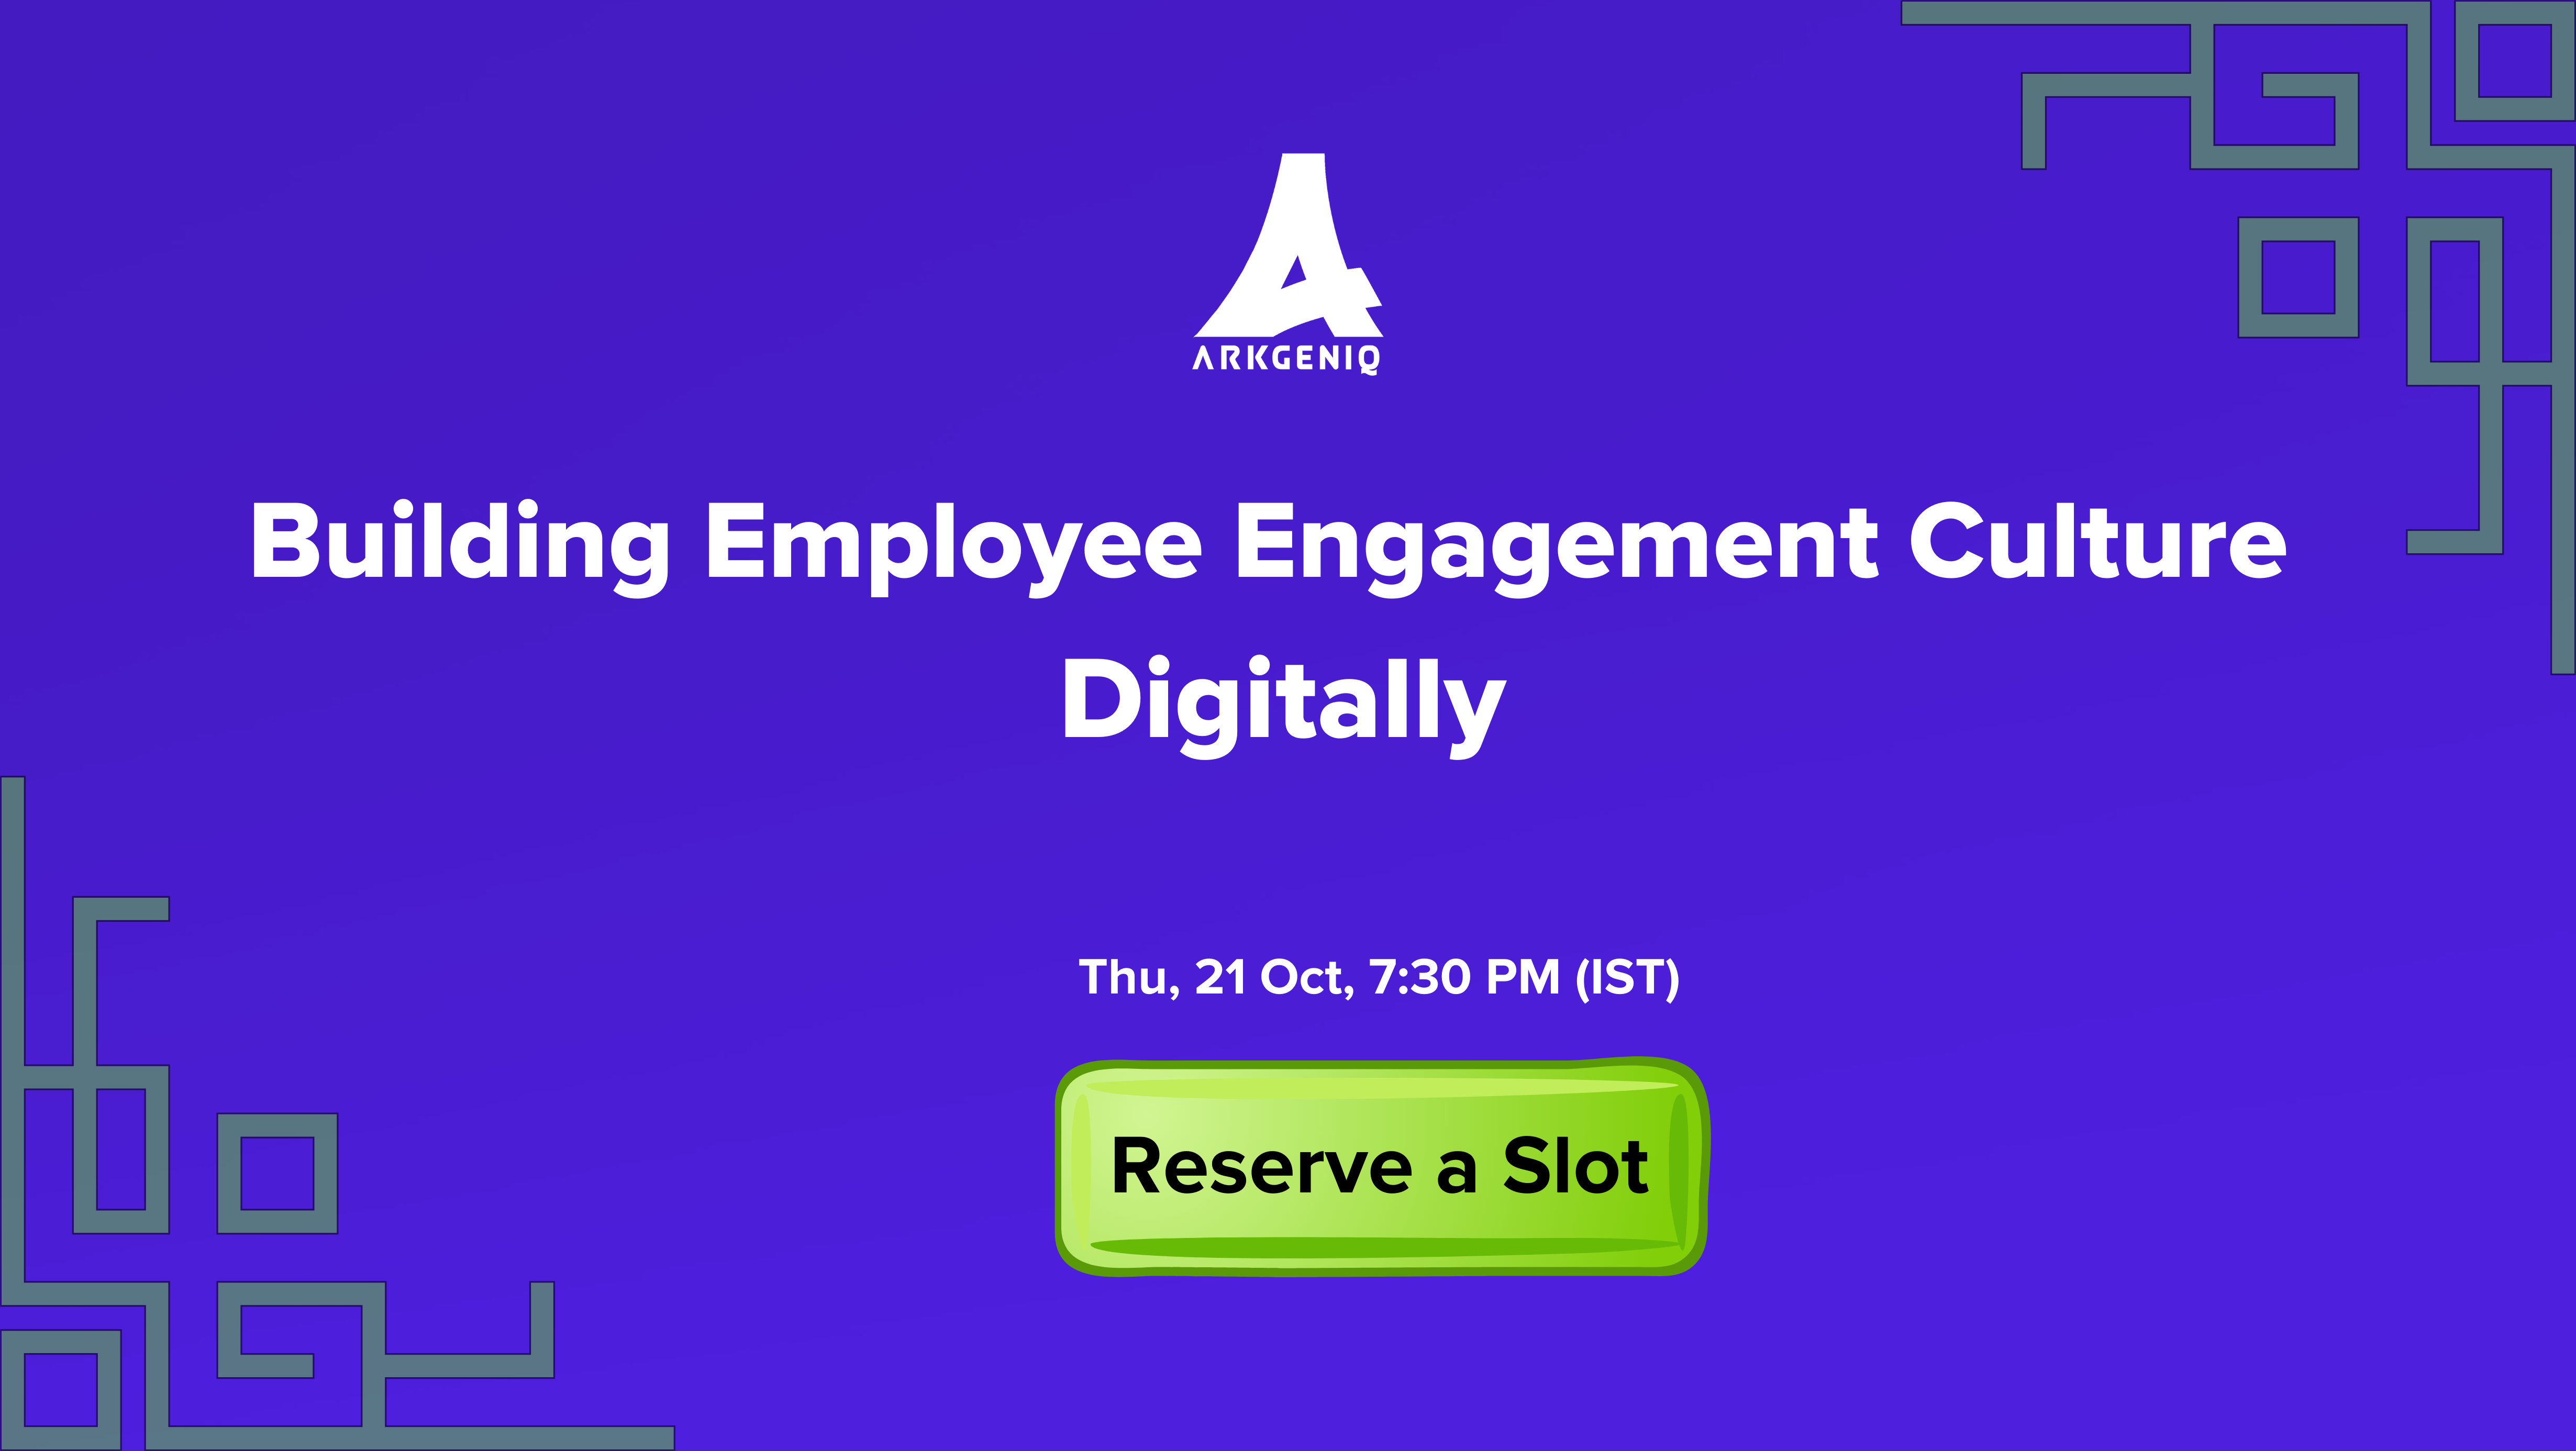 Building Employee Engagement Culture Digitally, Online Event